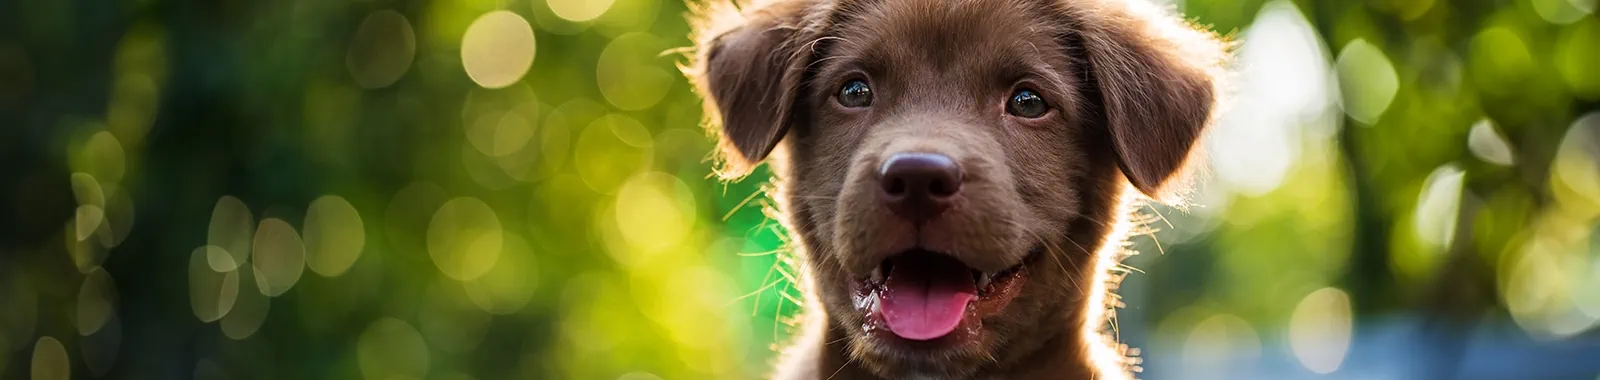 7 behaviours to look out for in a new puppy